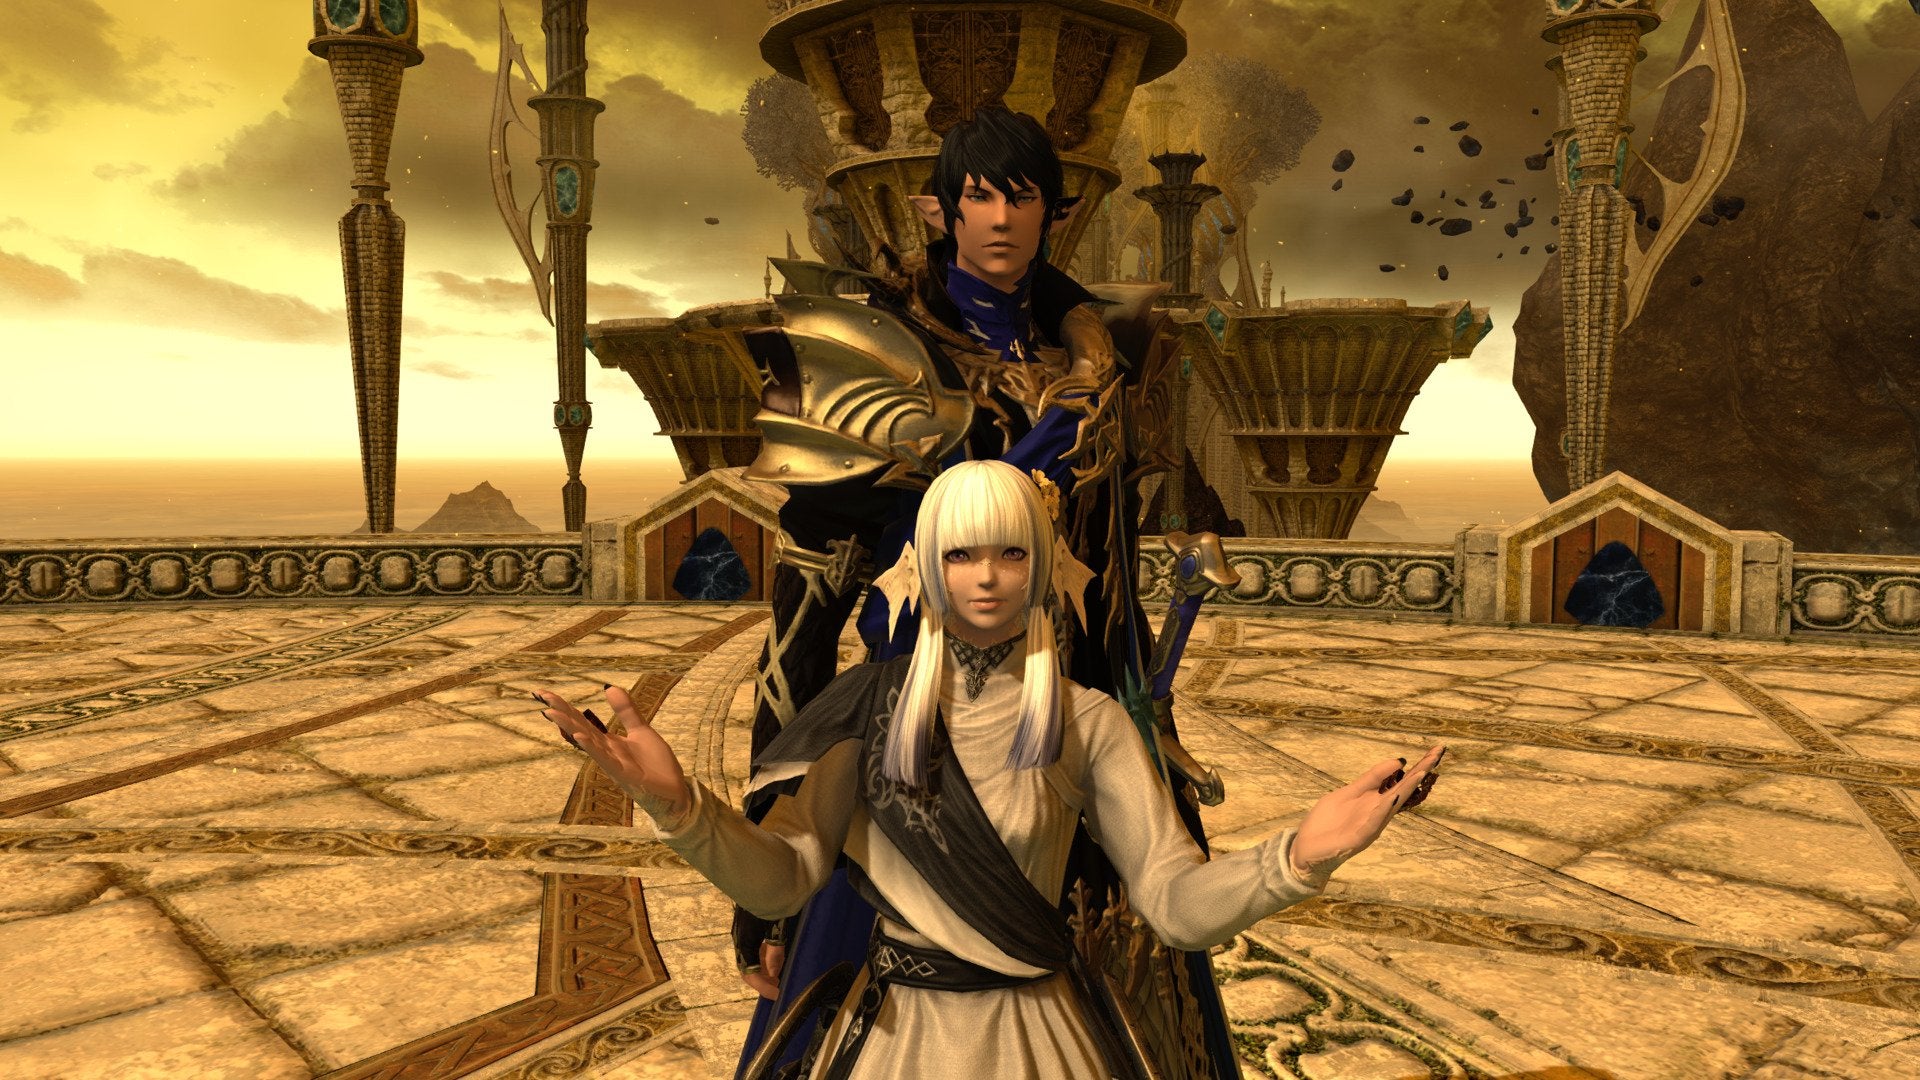 The Warrior of Light and Aymeric in Final Fantasy XIV.